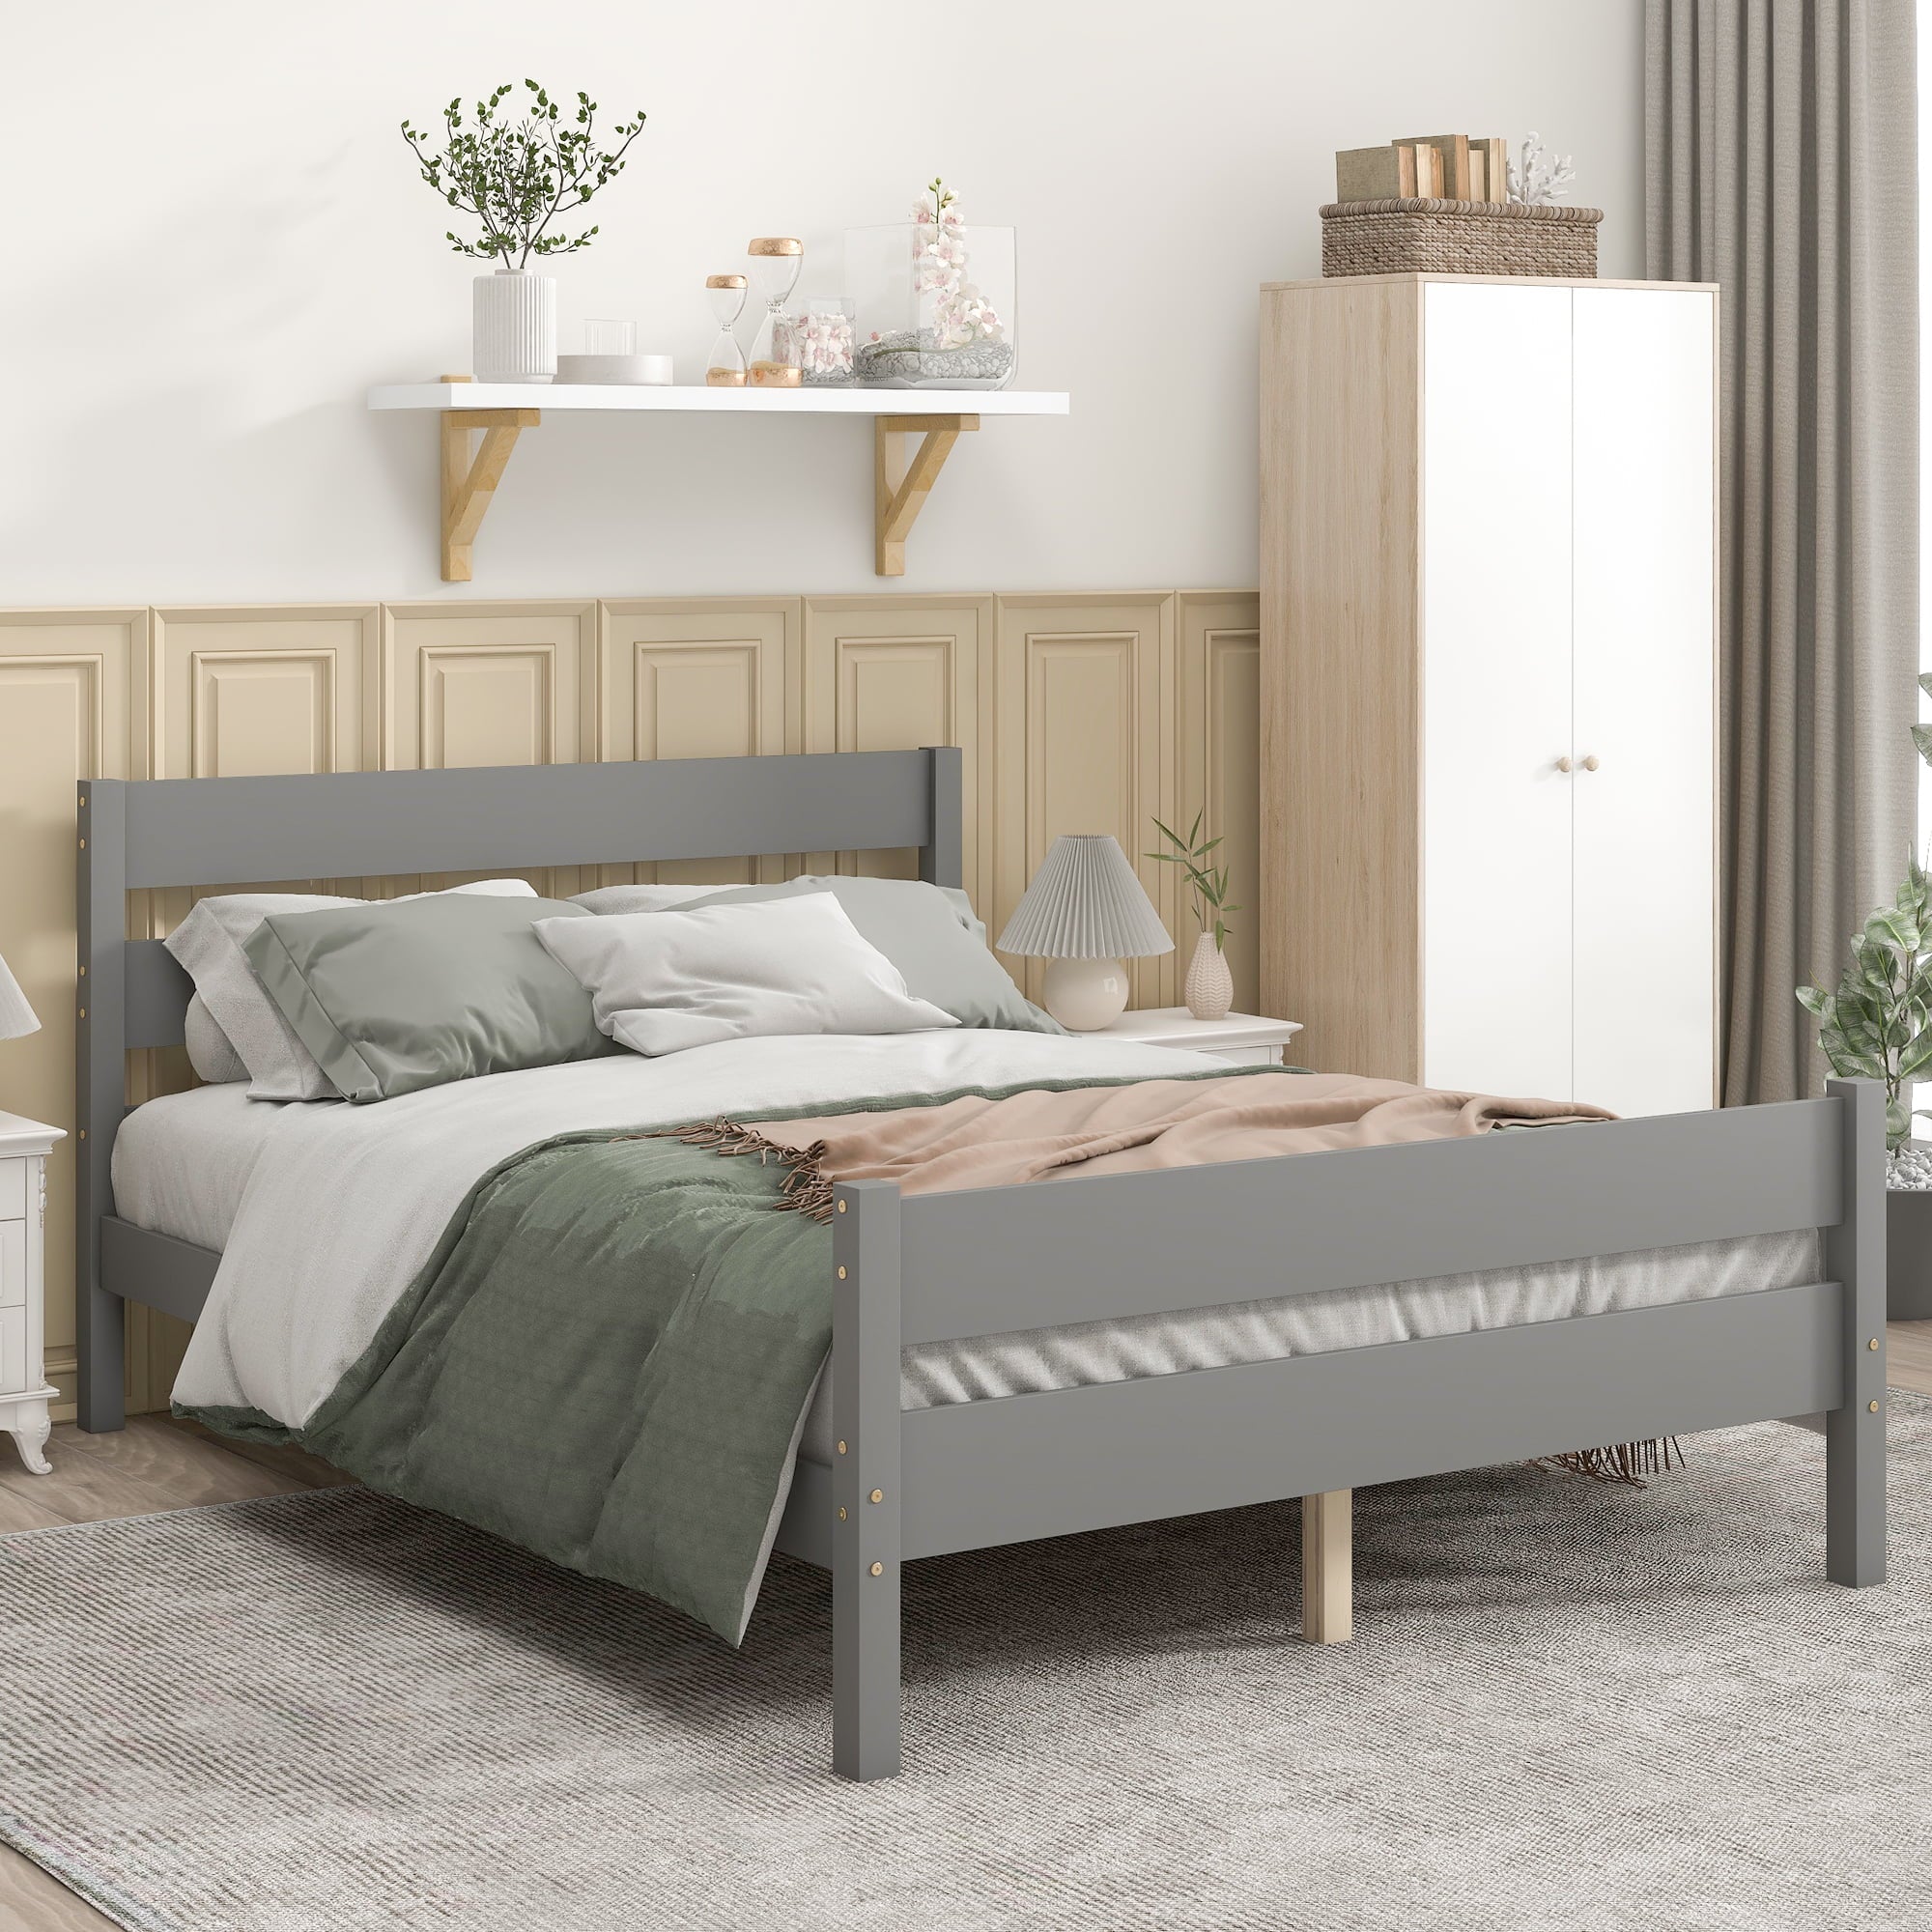 SYNGAR Gray Full Bed Frame with Headboard and Footboard, Modern Wood Bed Single Bed for Kids Adults, No Box Spring Needed Panel Bed, Wood Slat Support Mattress Foundation